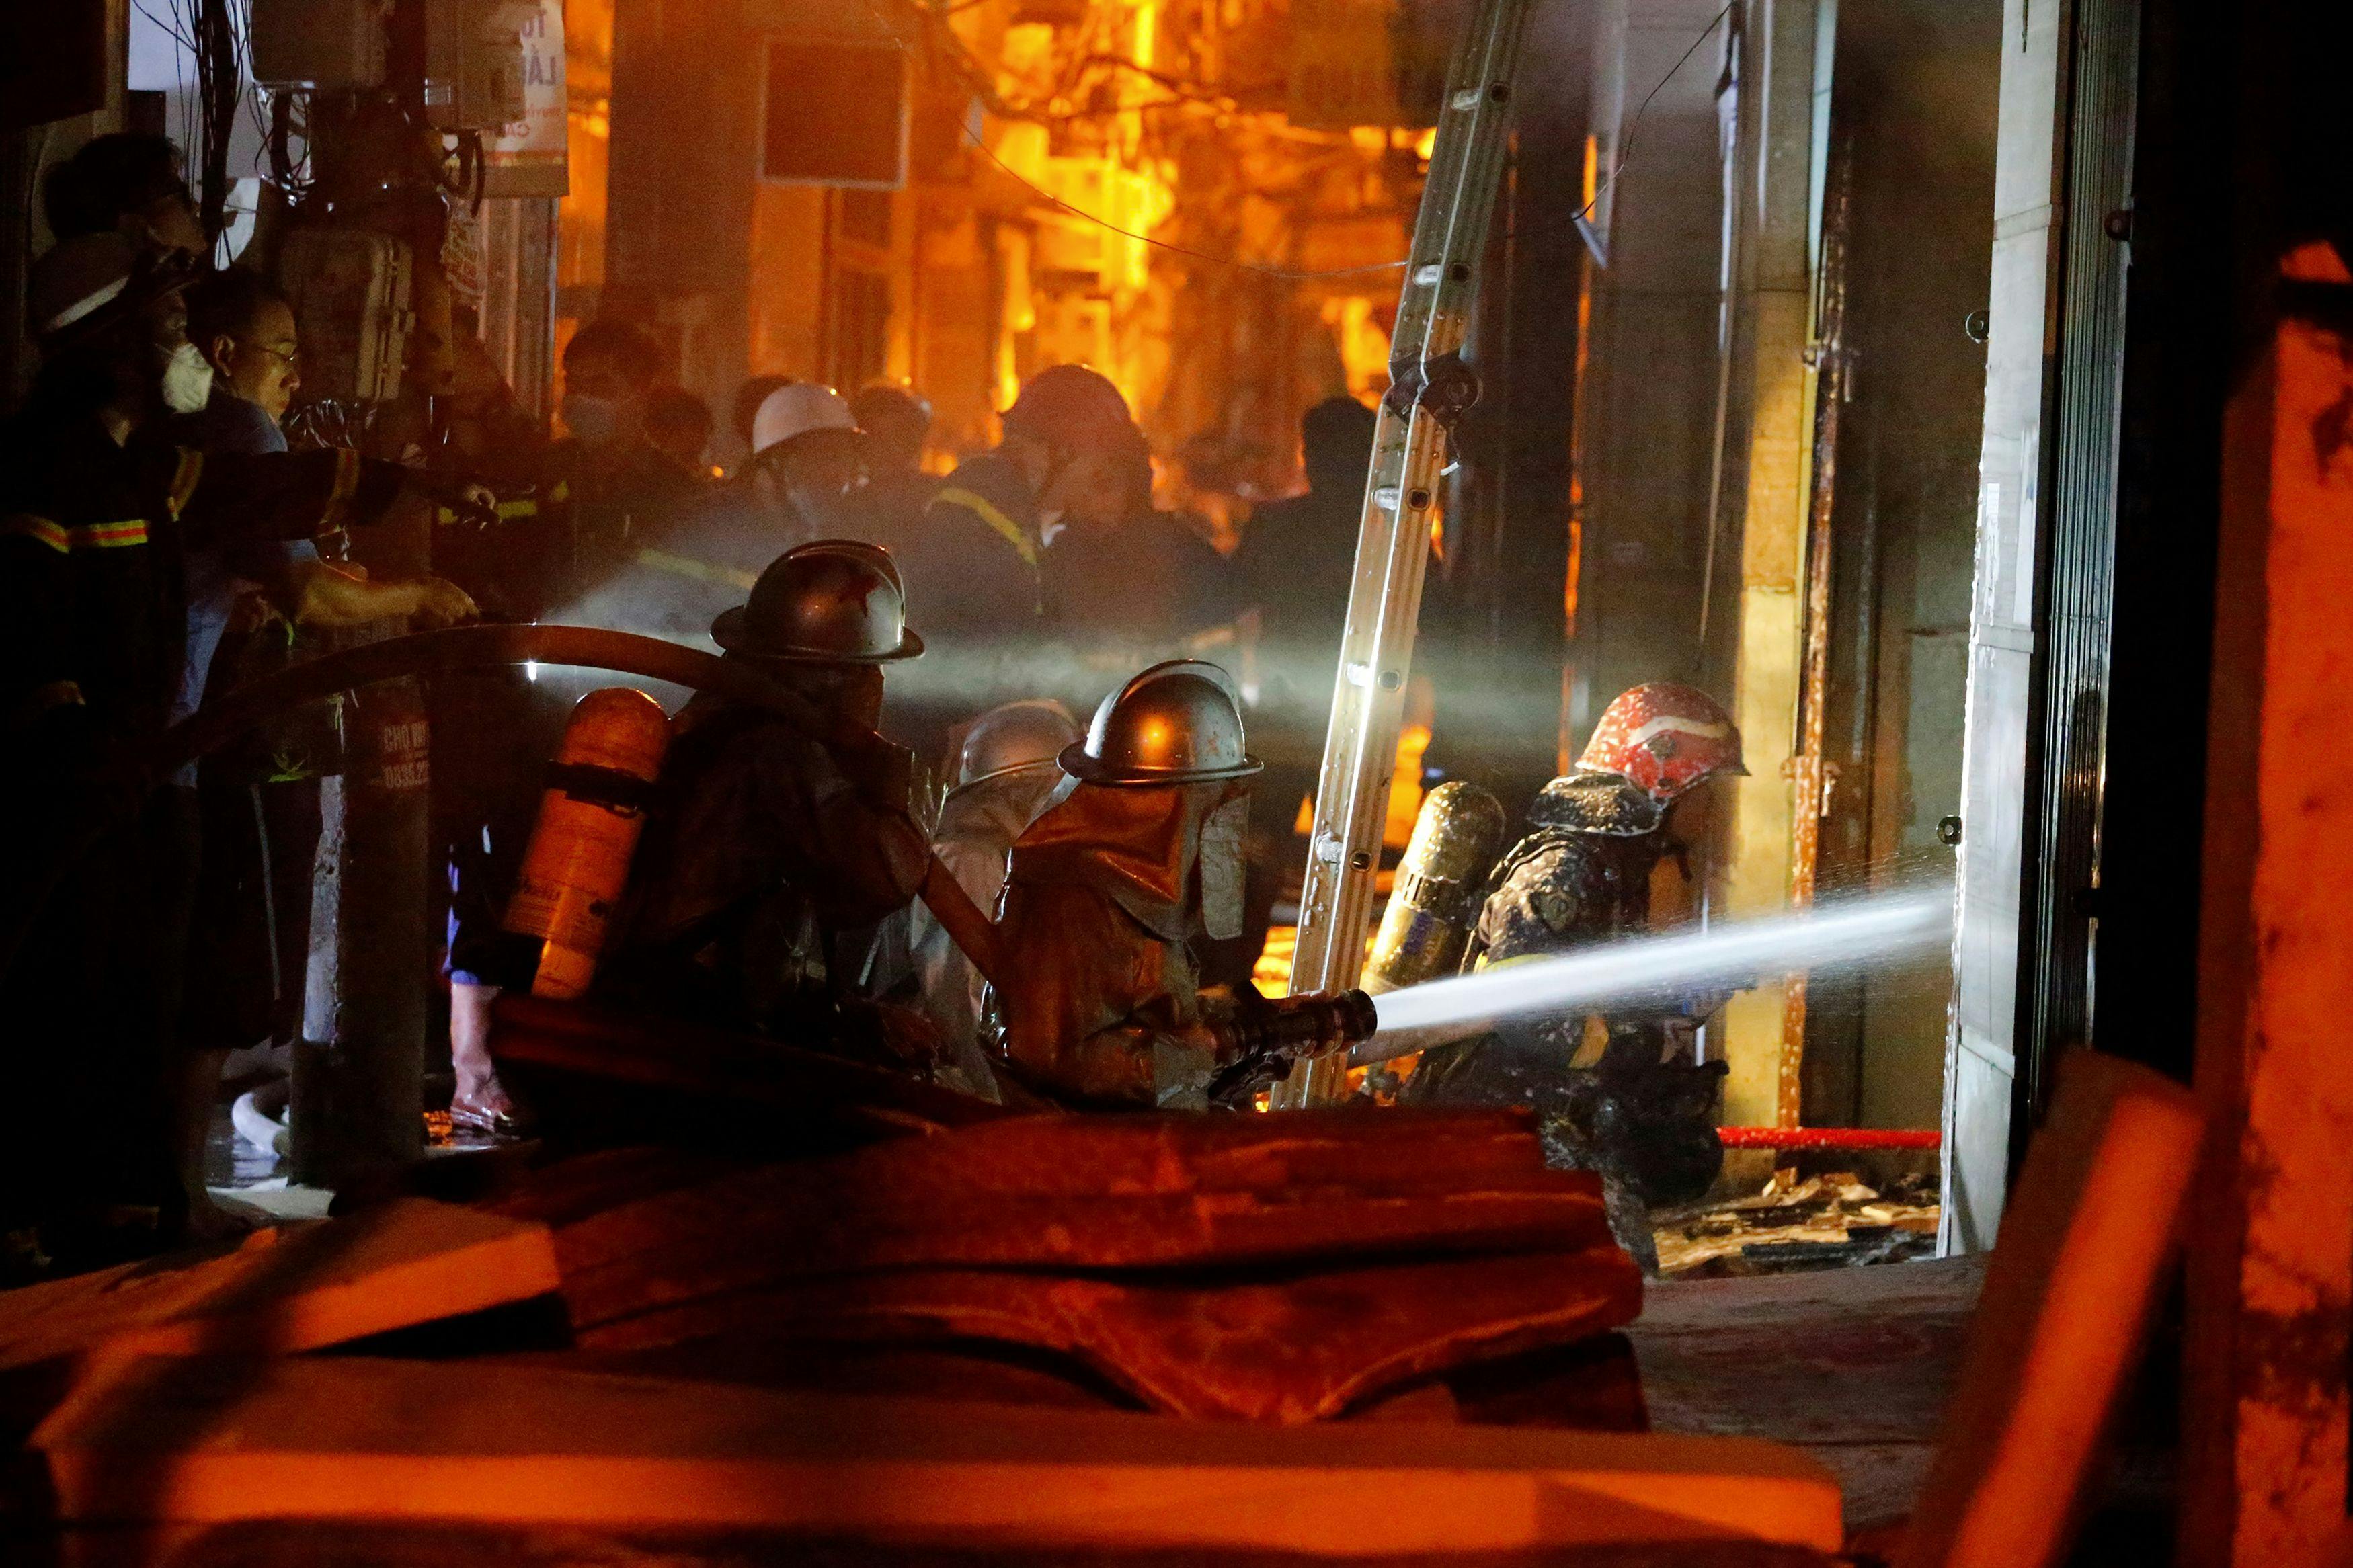 TOPSHOT - Firefighters work to put out a fire and rescue people at an apartment block in Hanoi on September 13, 2023. (Photo by LE PHU / AFP)